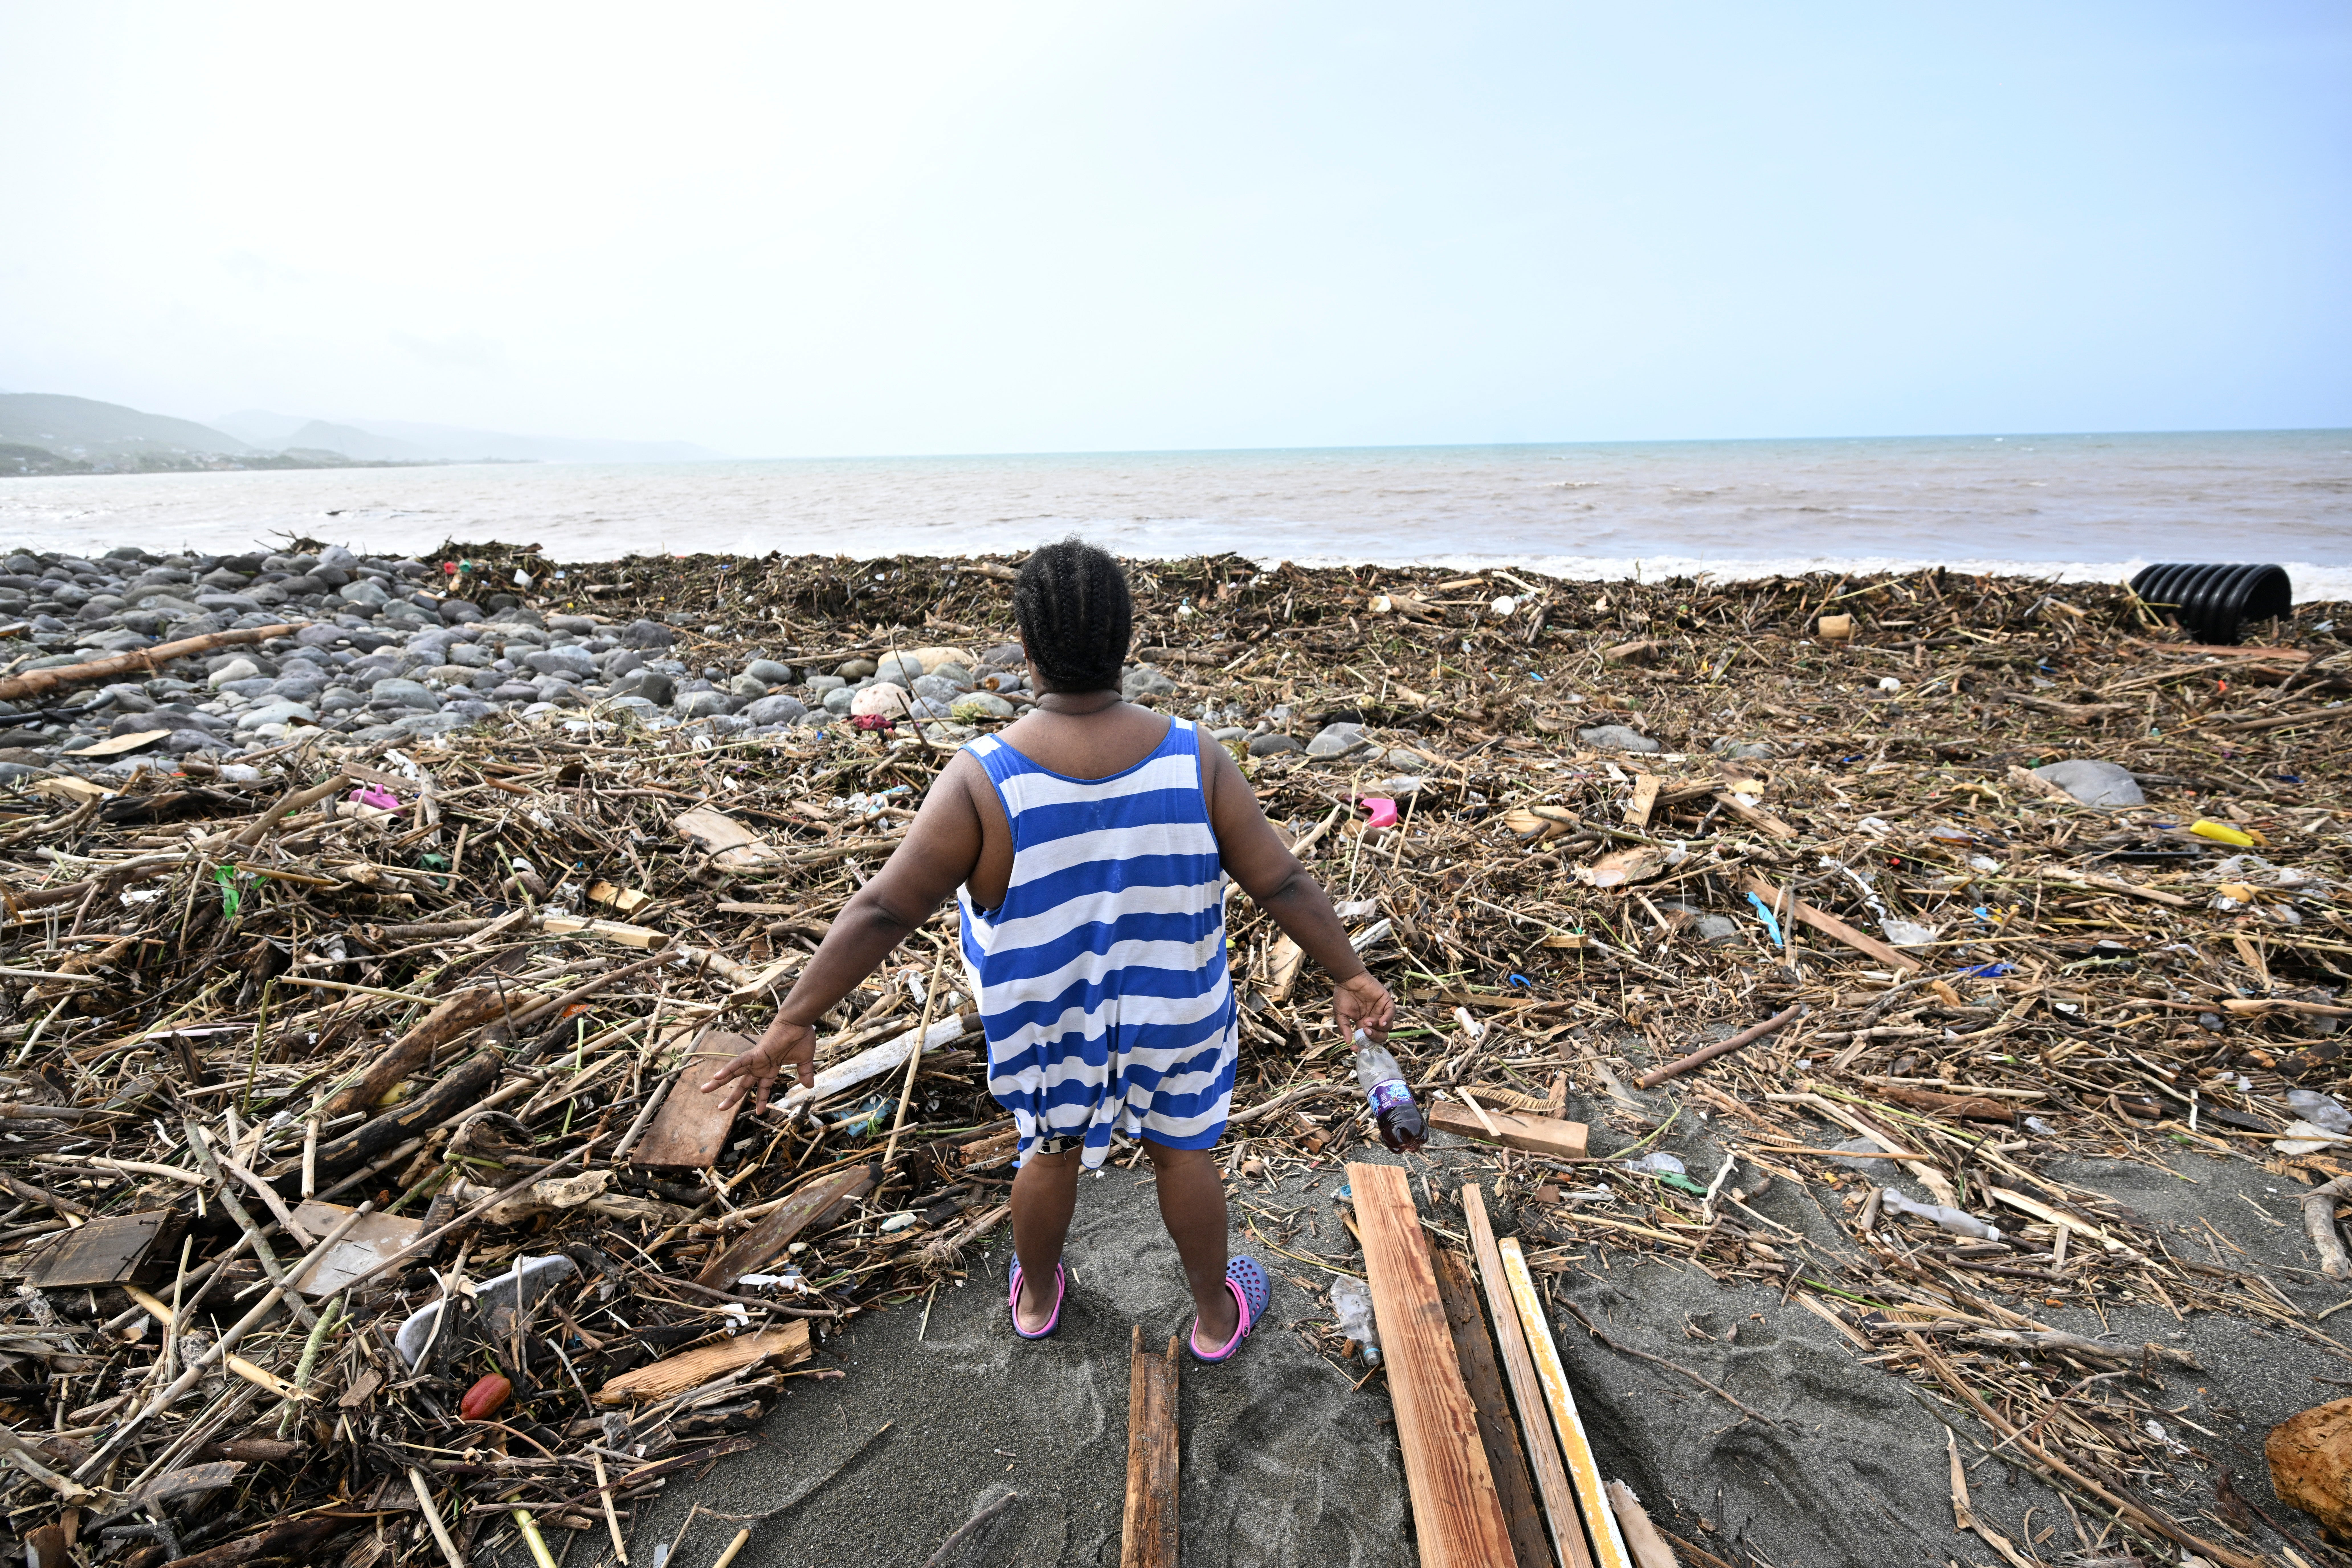 A woman looks at a beach littered with debris in Bull Bay, Jamaica on Thursday after Hurricane Beryl